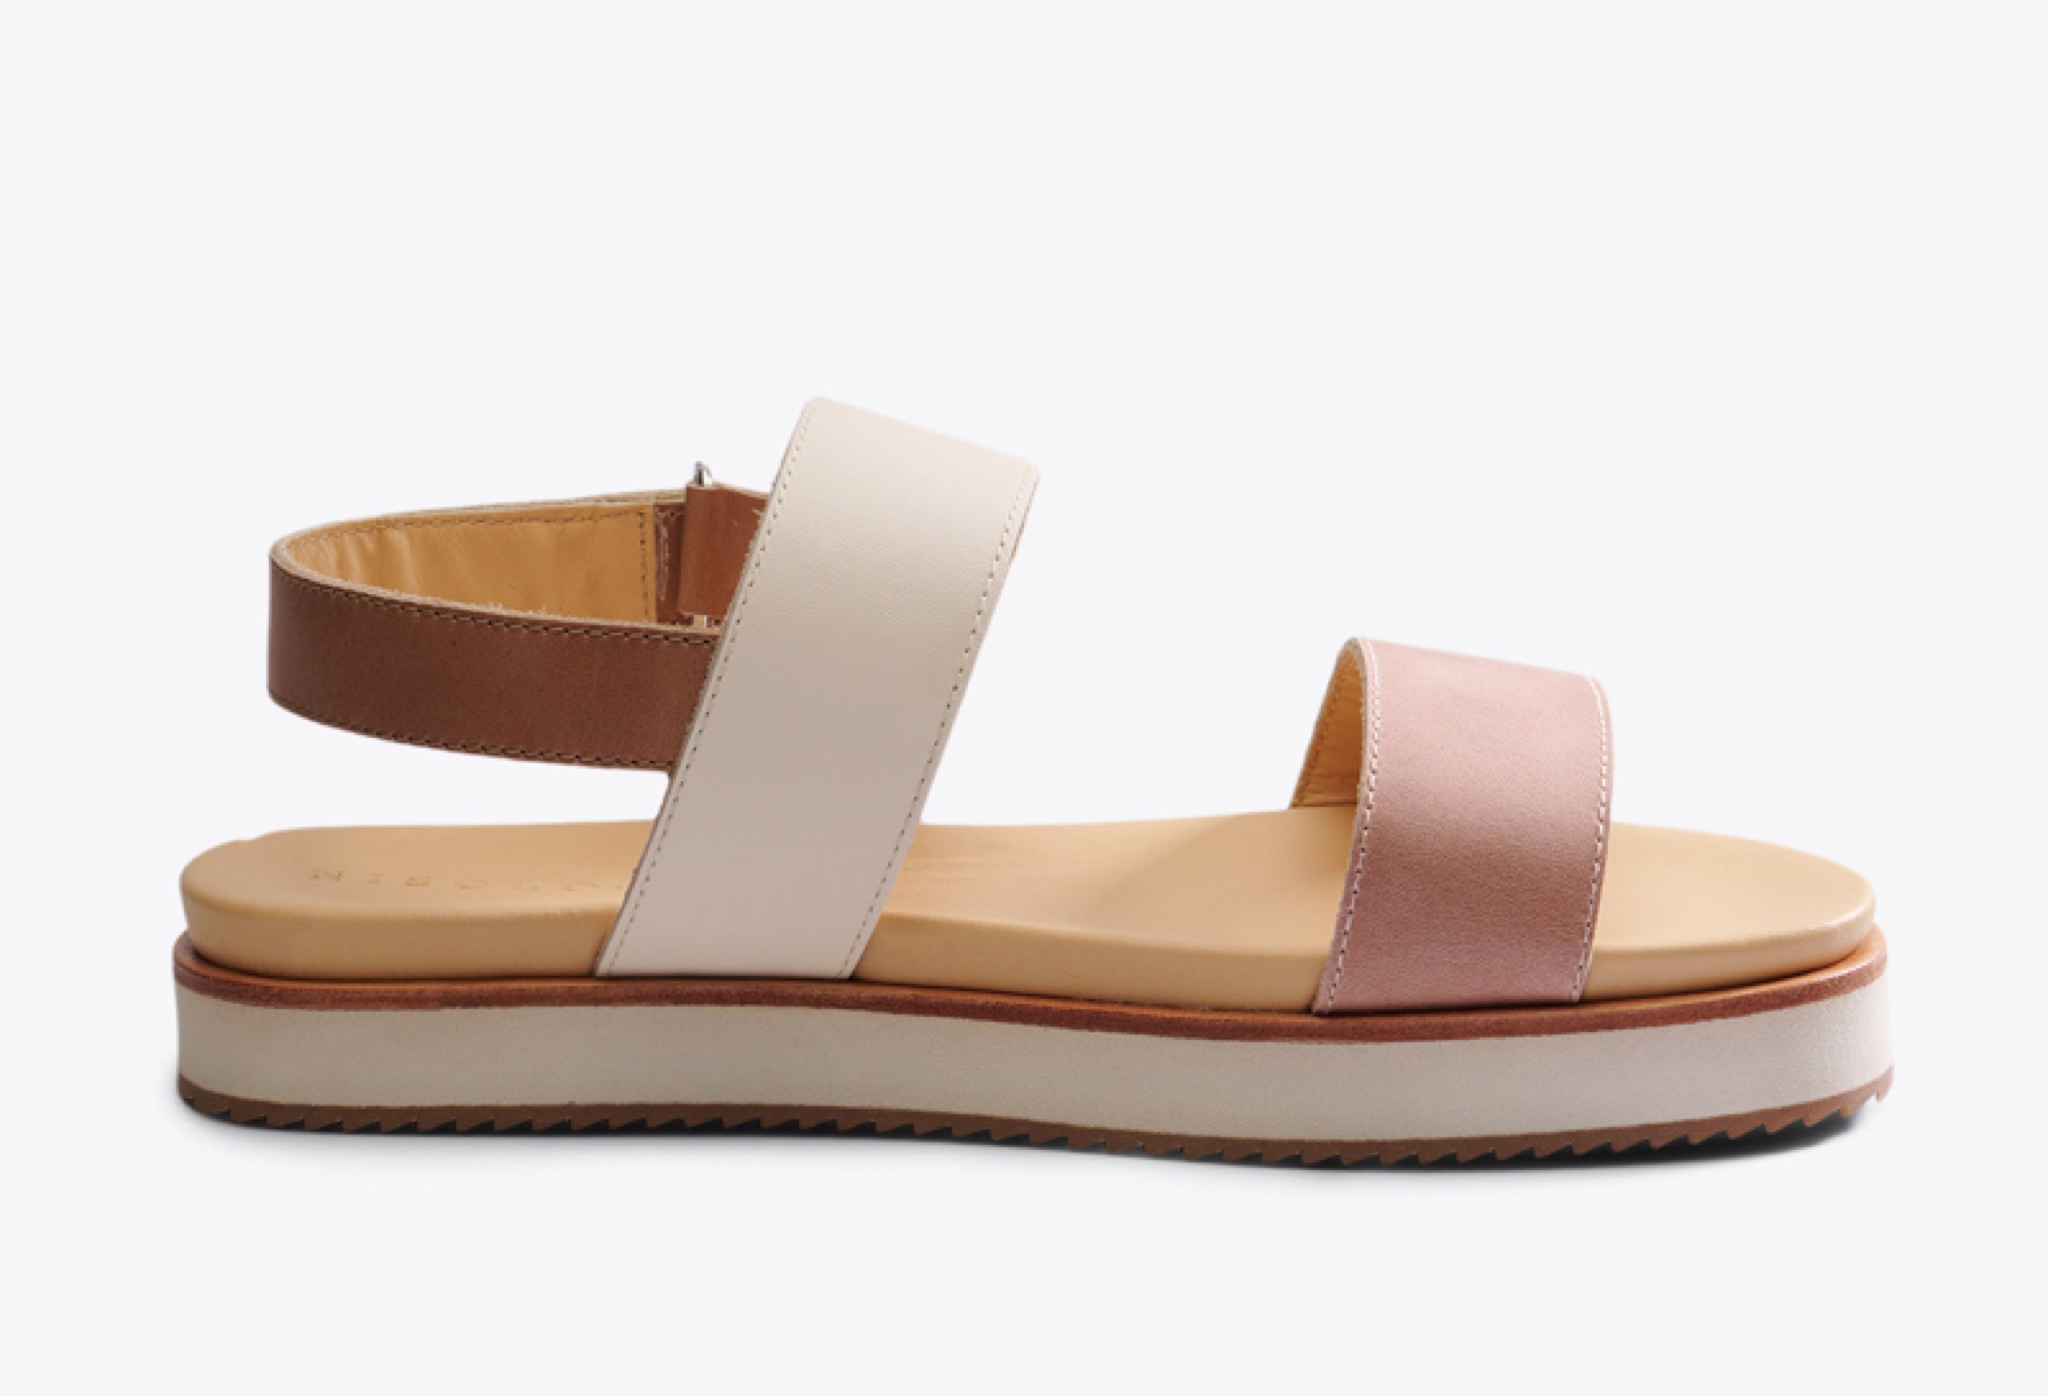 Nisolo Go-To Flatform Sandal Desert Rose/Bone Colorblock - Every Nisolo product is built on the foundation of comfort, function, and design. 